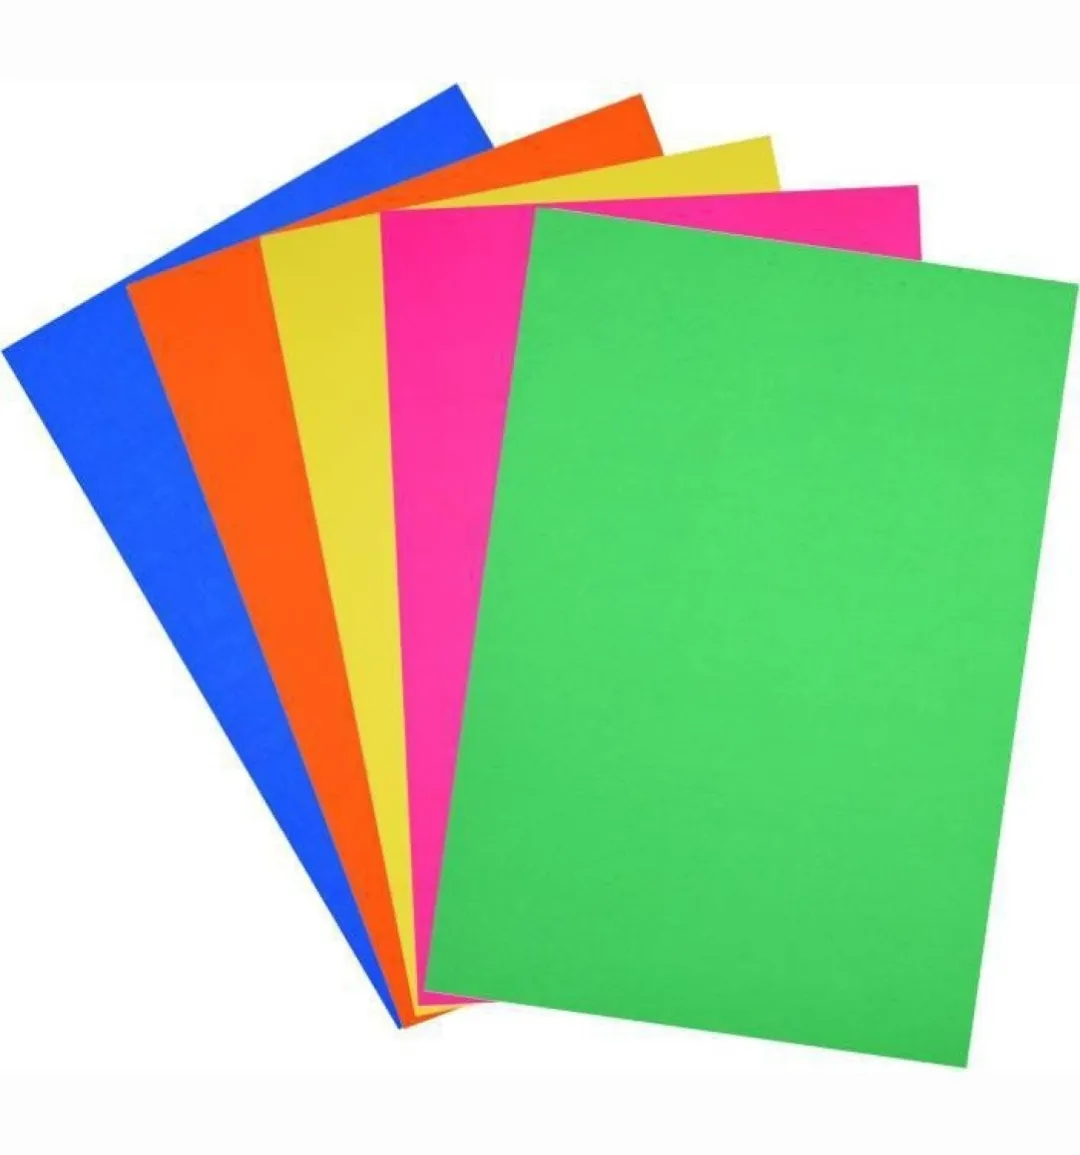 Lotus A4 Size Multi Use Paper Colorful Plain Paper 20 Sheets Pack